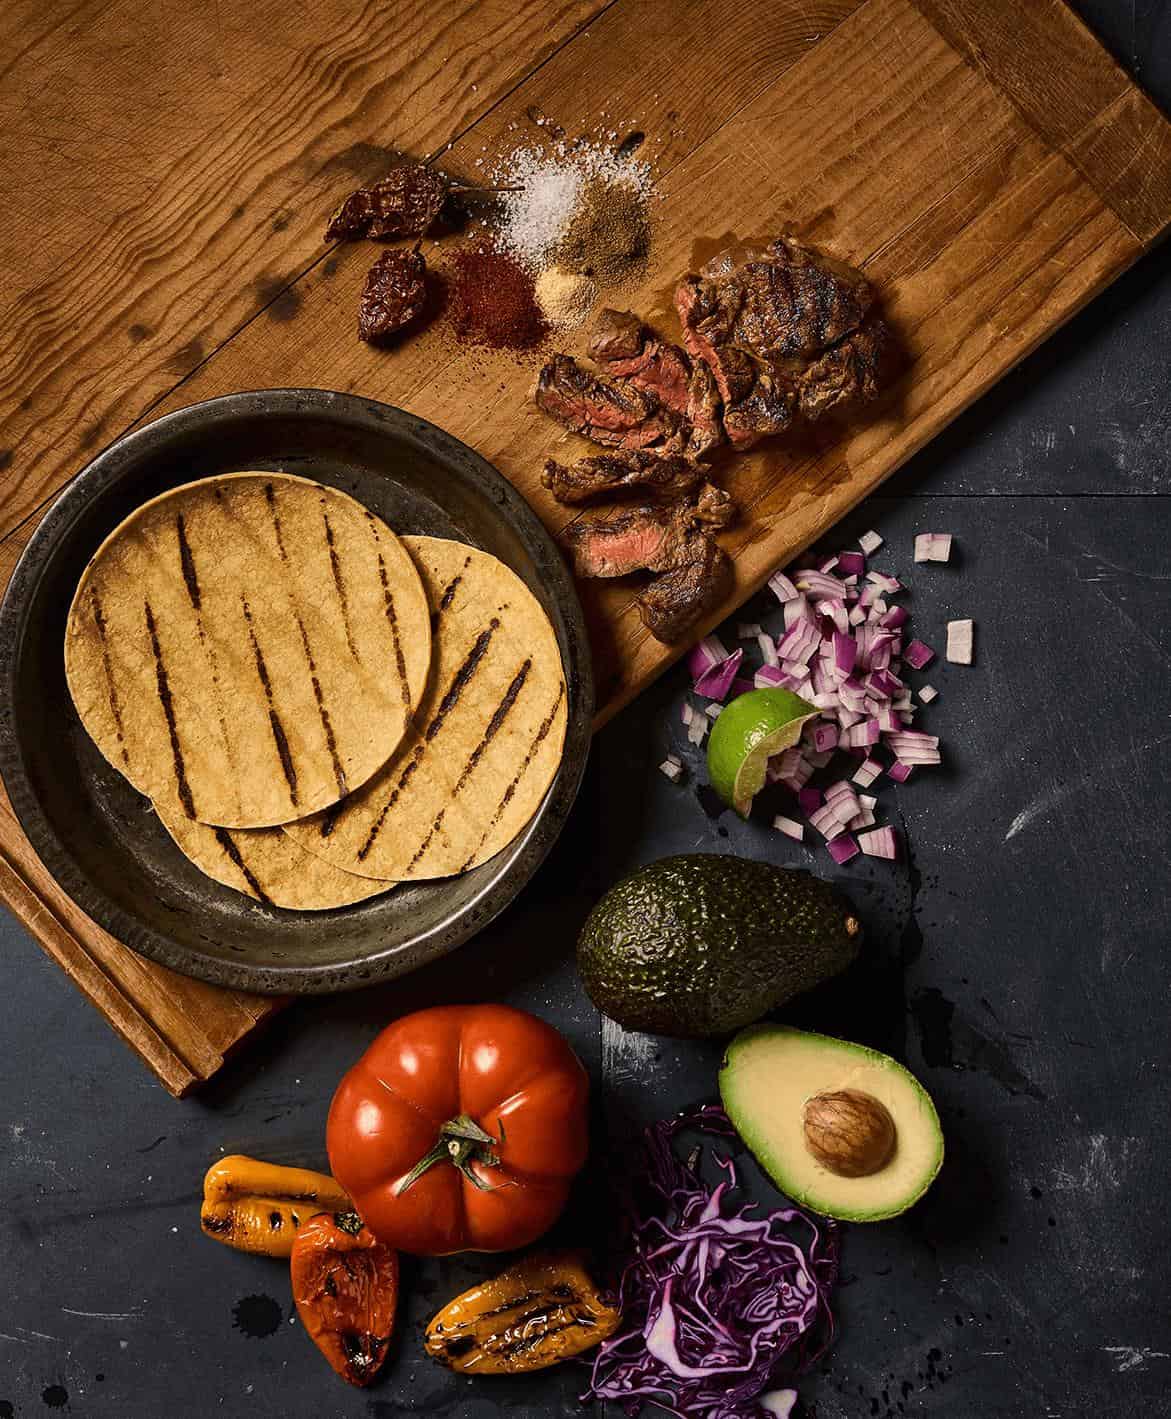  Our homemade dry rub is the secret ingredient that takes these tacos to the next level.